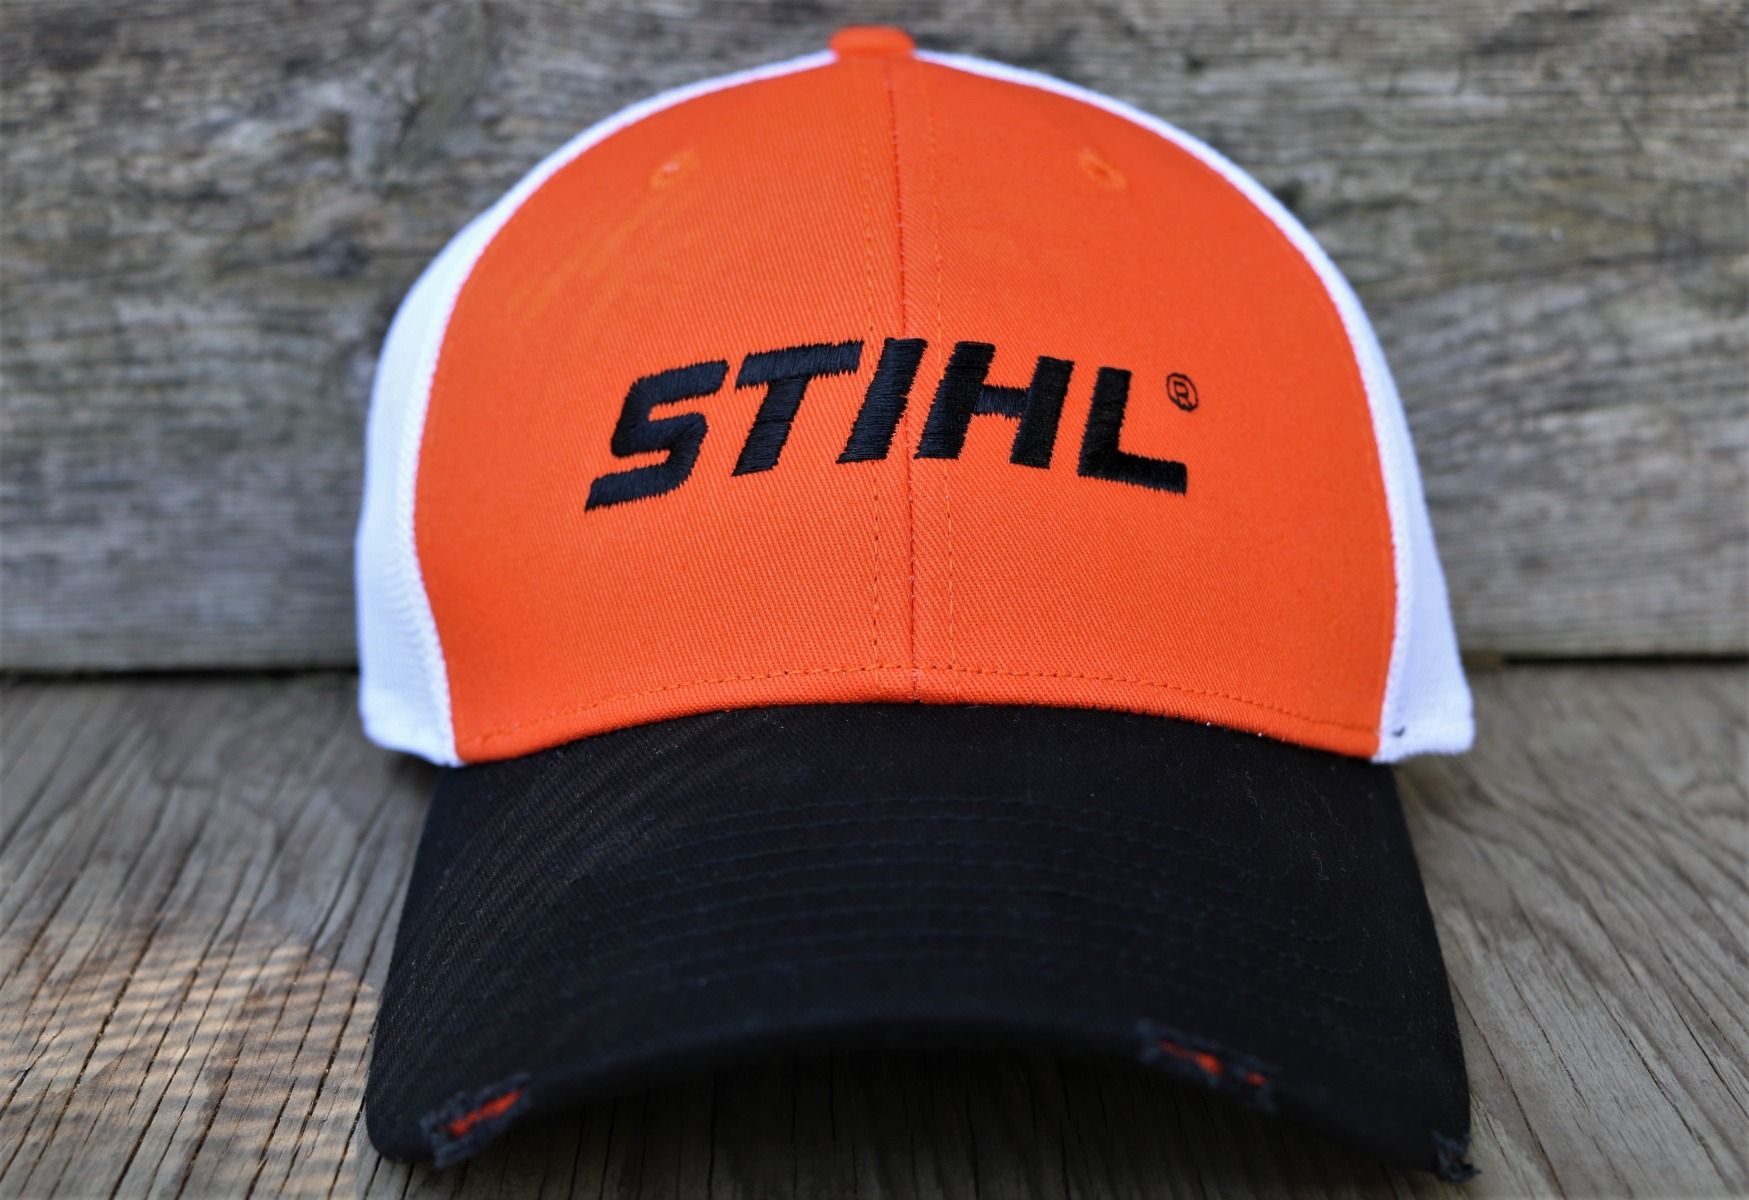 STIHL NEW ERA 39Thirty Distressed hat. Available in sizes M/L and L/XL